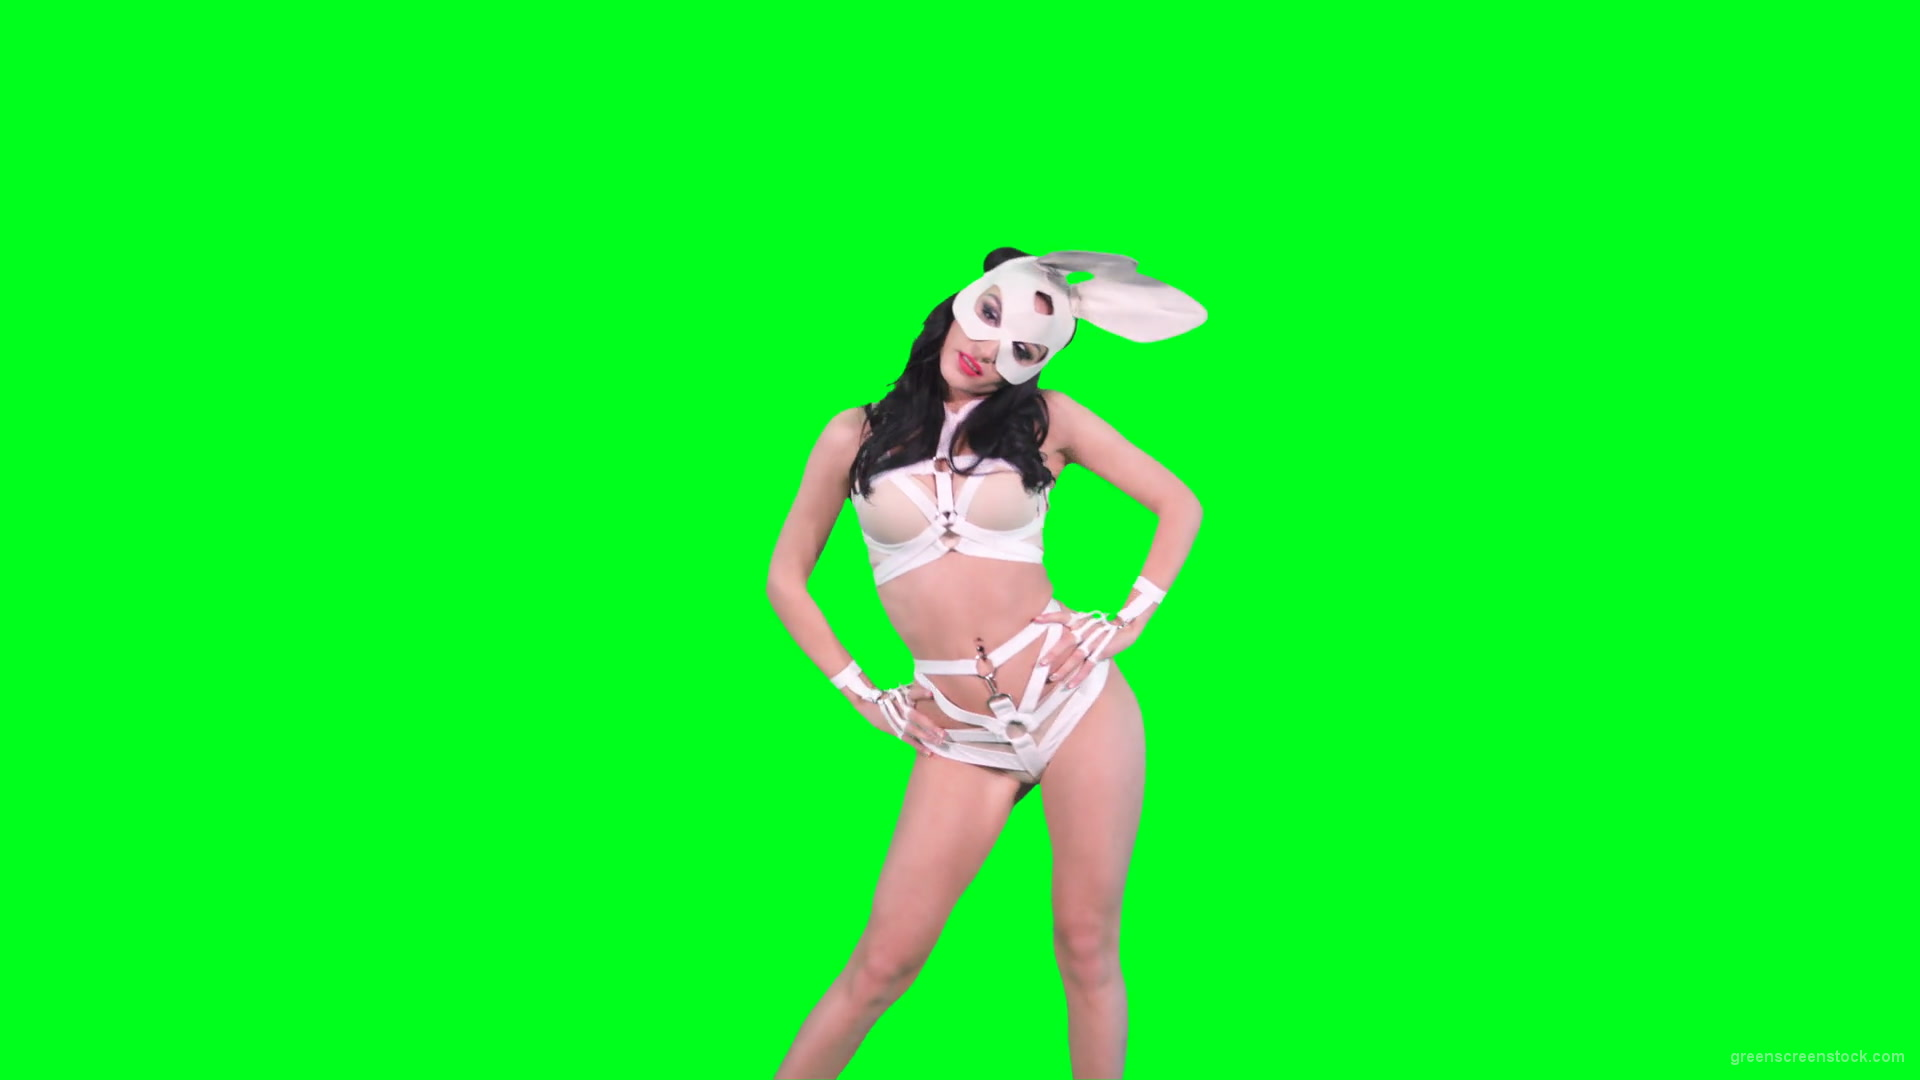 Go-go-Dancer-in-White-Rabbit-EDM-fetish-costume-making-sexy-moves-on-green-screen-4K-video-footage-1920_002 Green Screen Stock